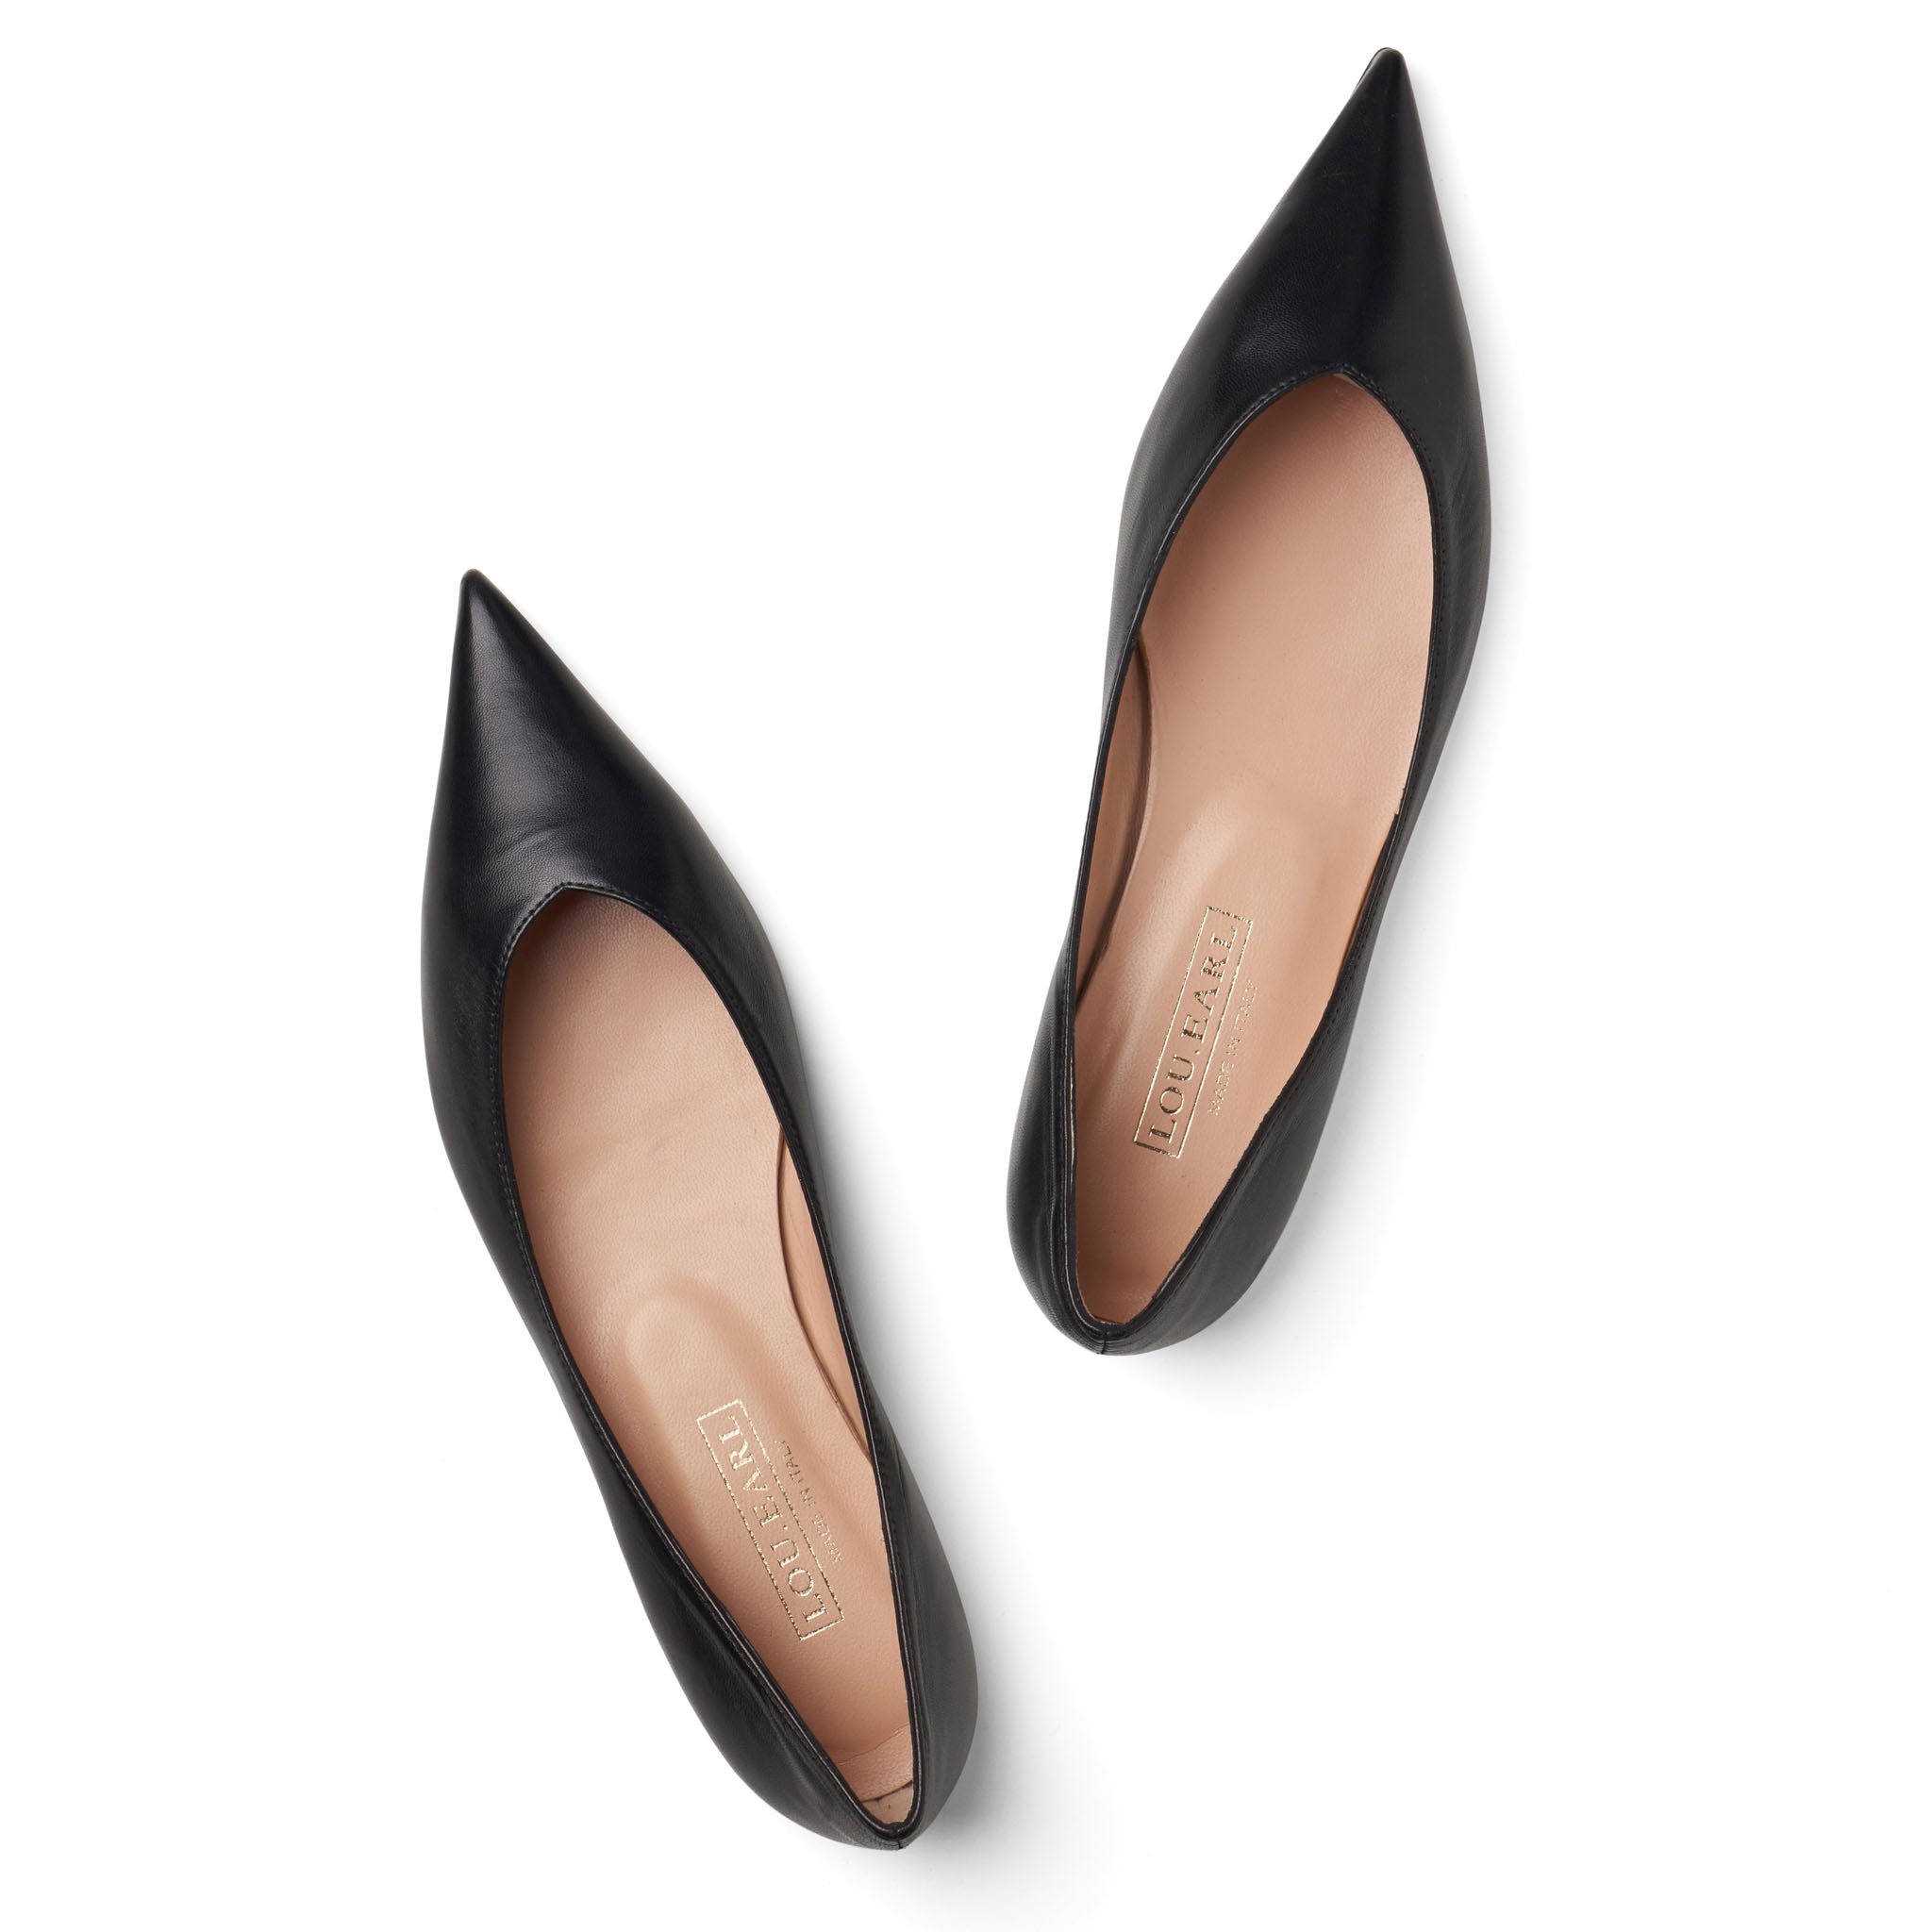 ultra pointed toe flat shoes for women in a smooth shiny black leather for business or sleek fashion